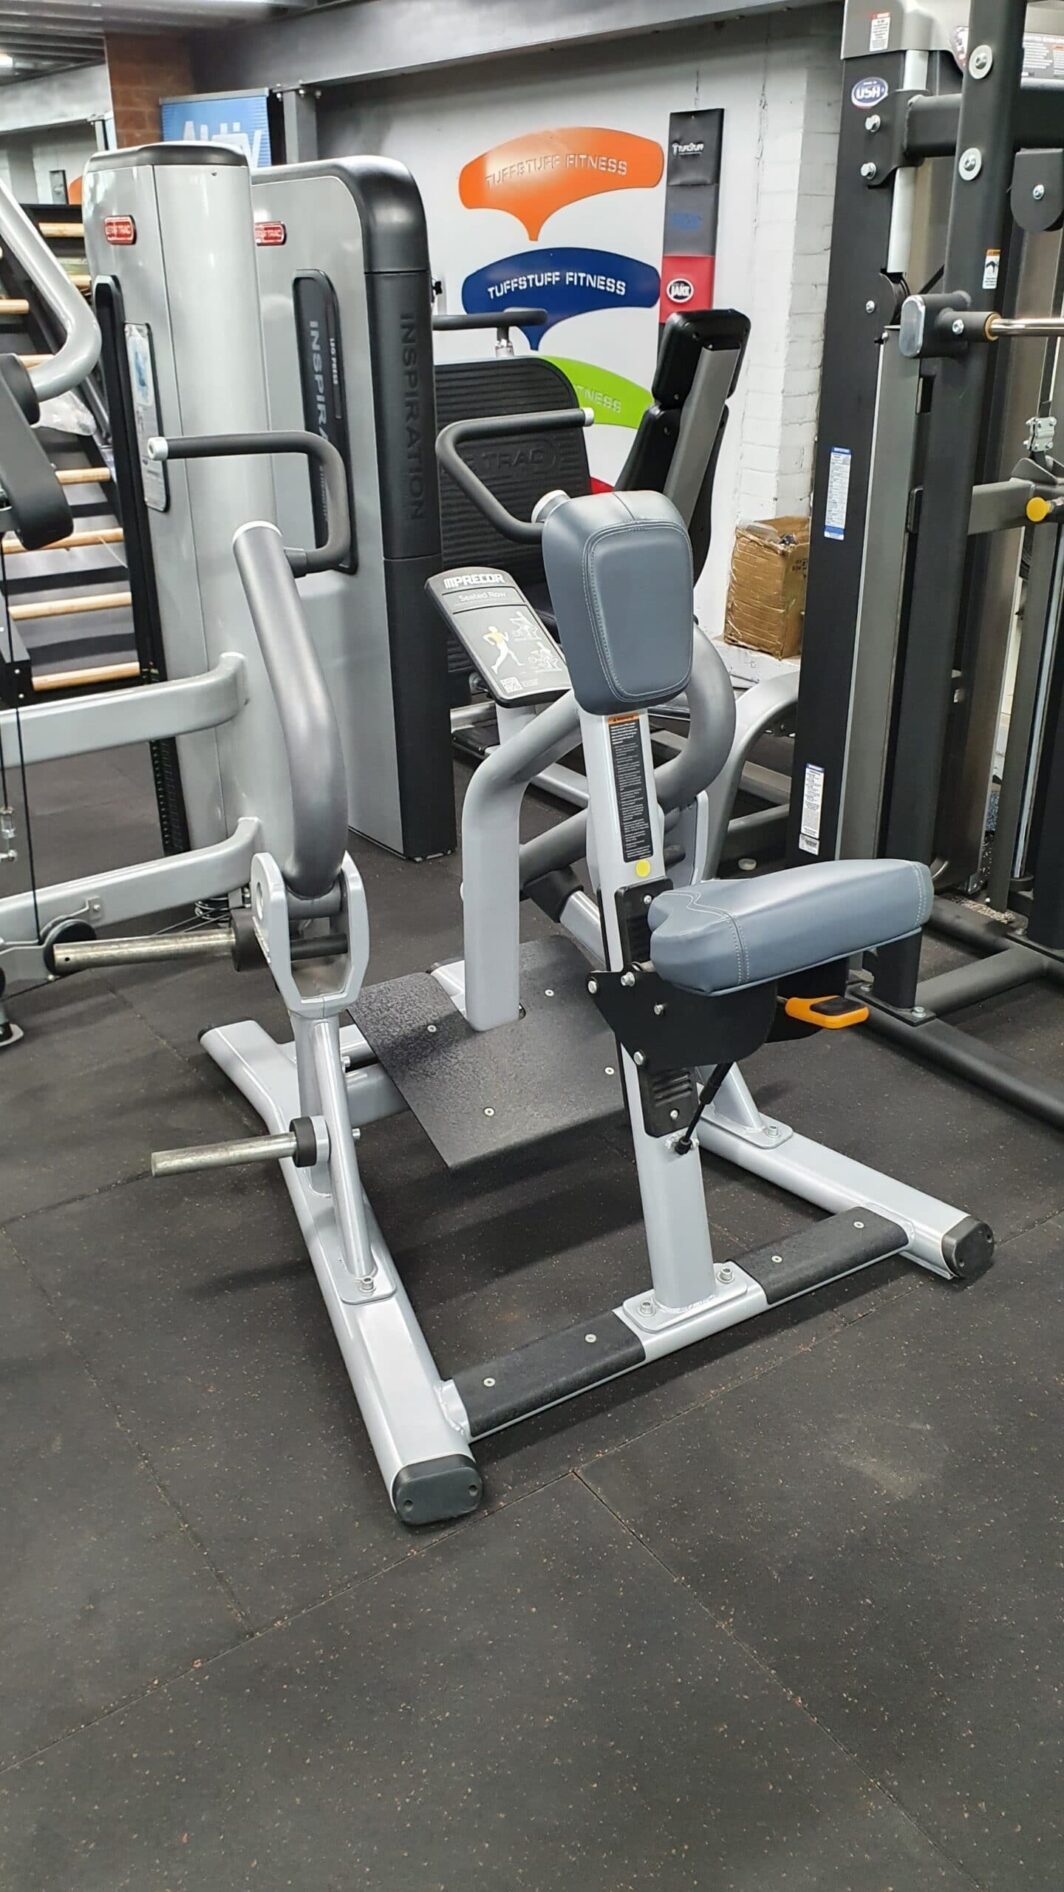 Precor Discovery Plated Loaded Seated Row gym equipment